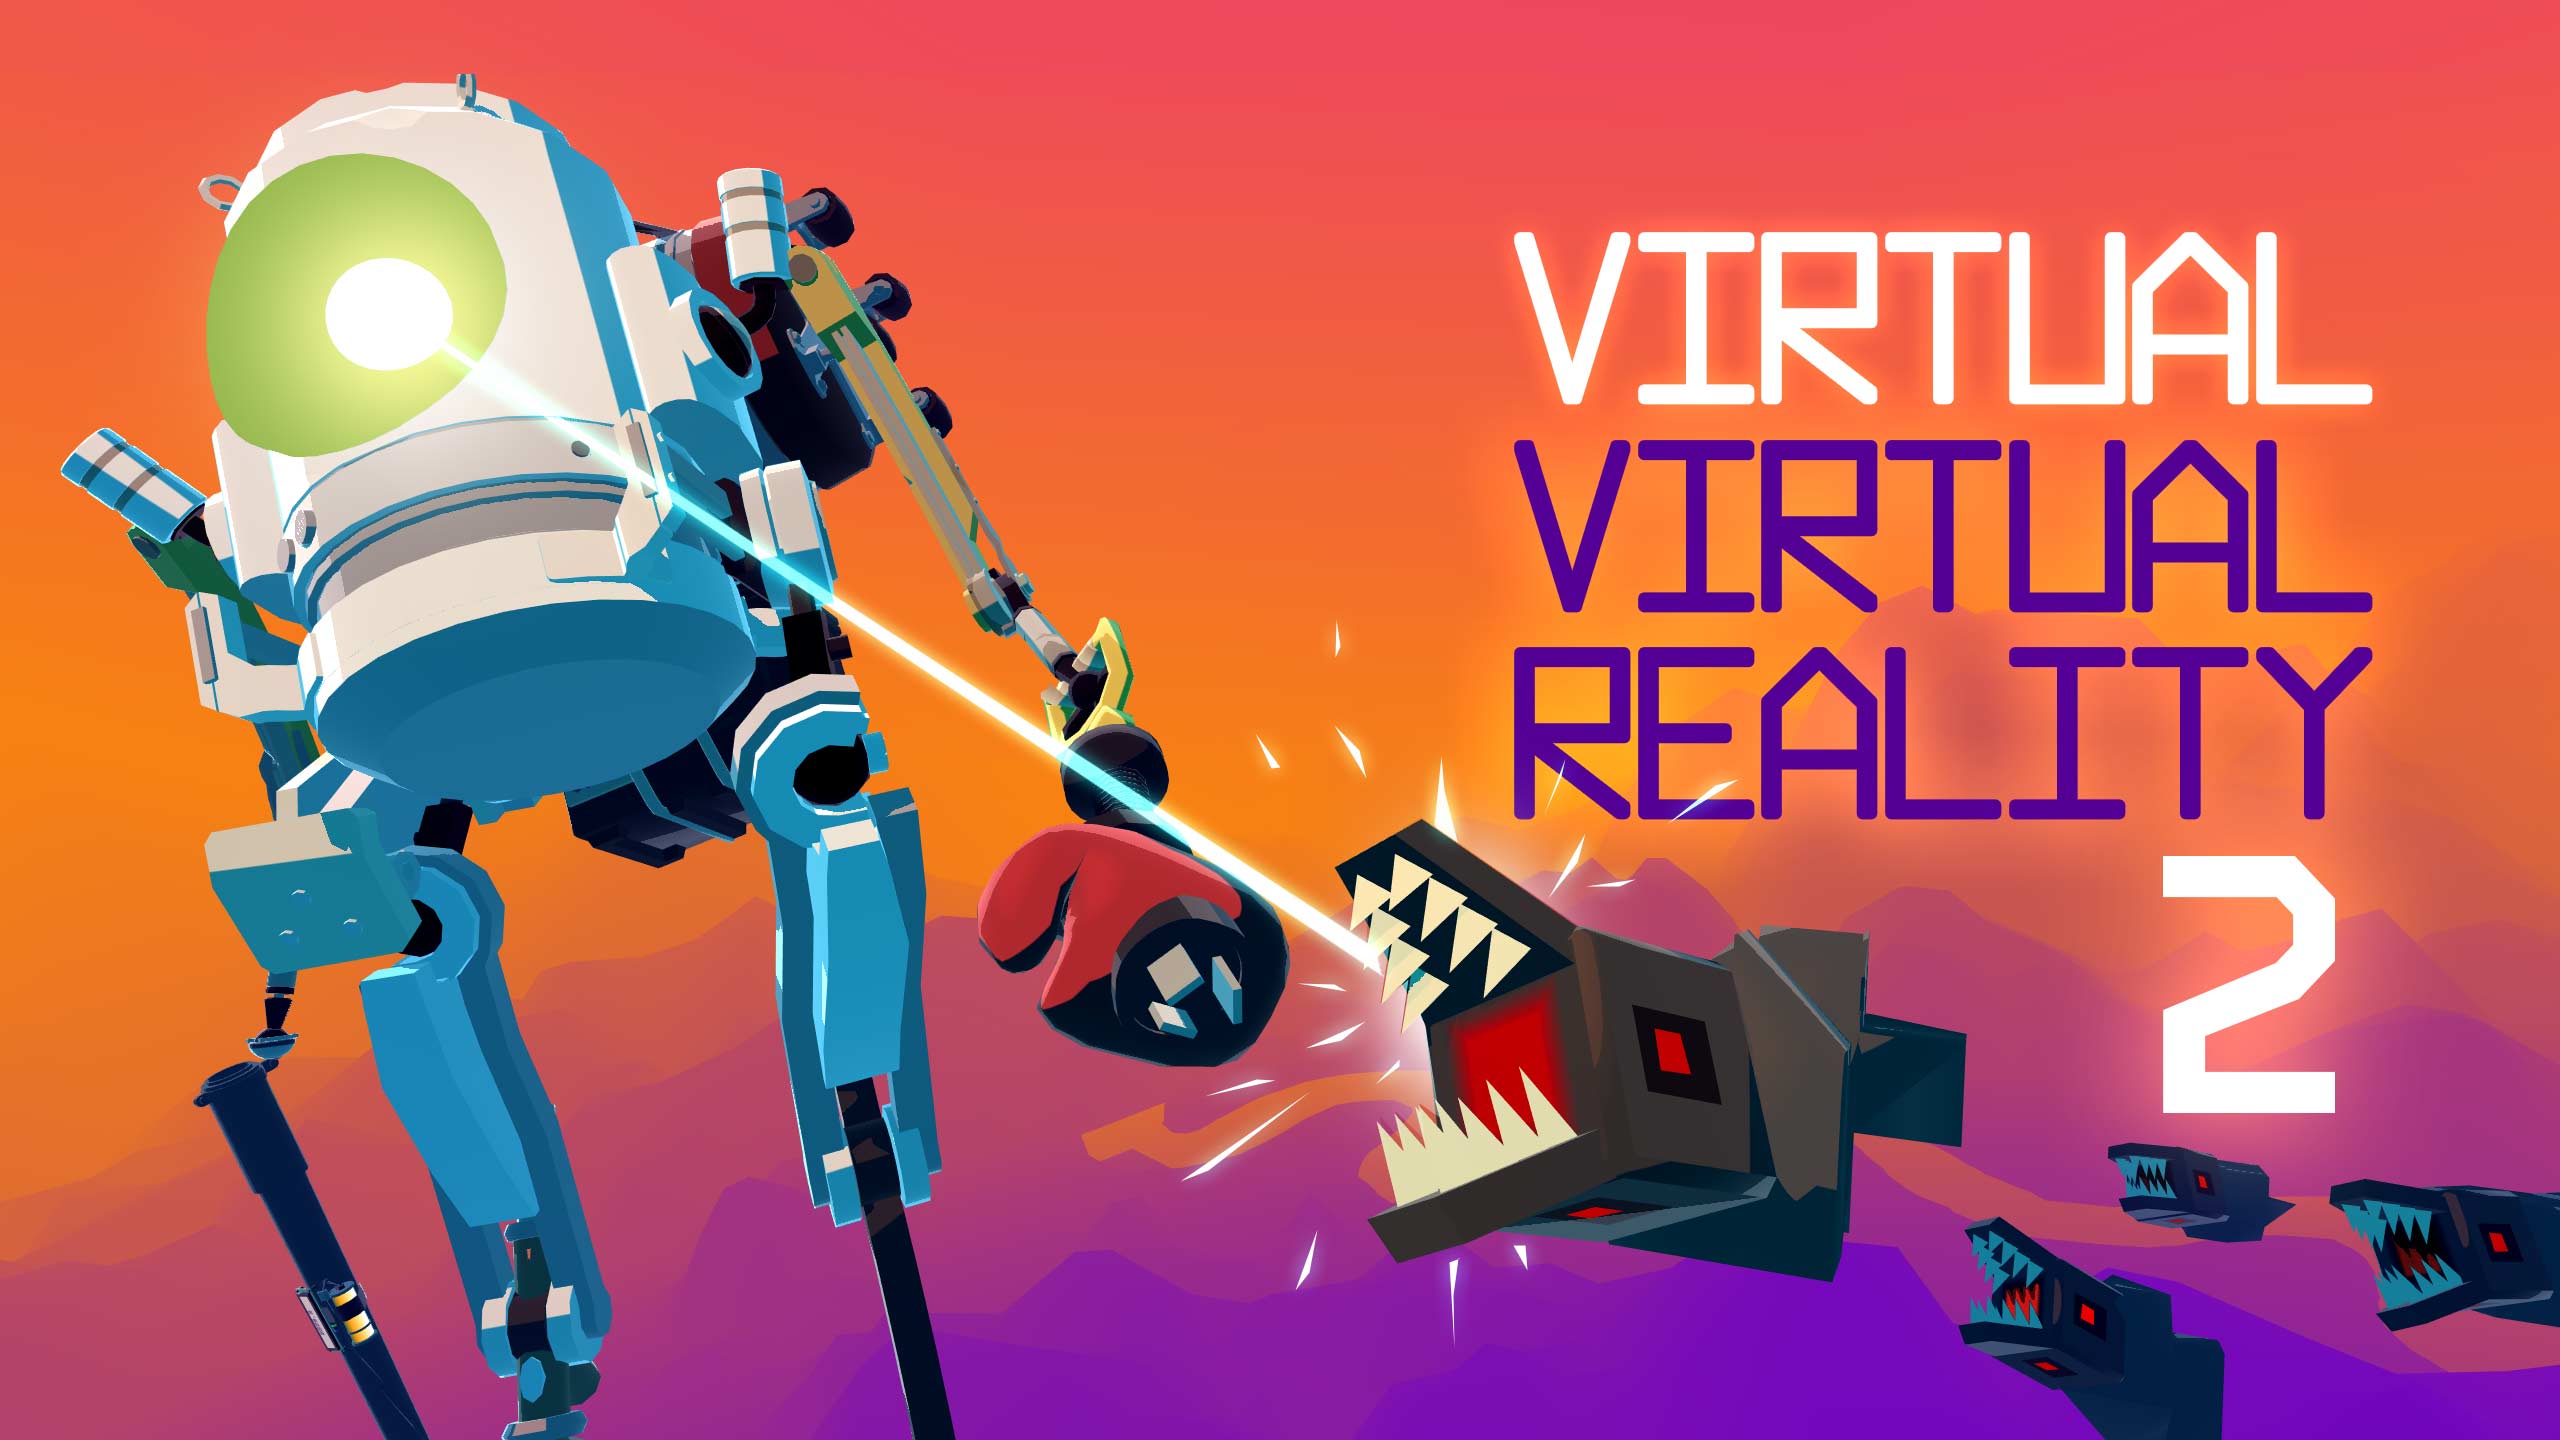 ‘Virtual Virtual Reality 2’ is a One-of-a-Kind VR Game That’s Not Ready for Launch